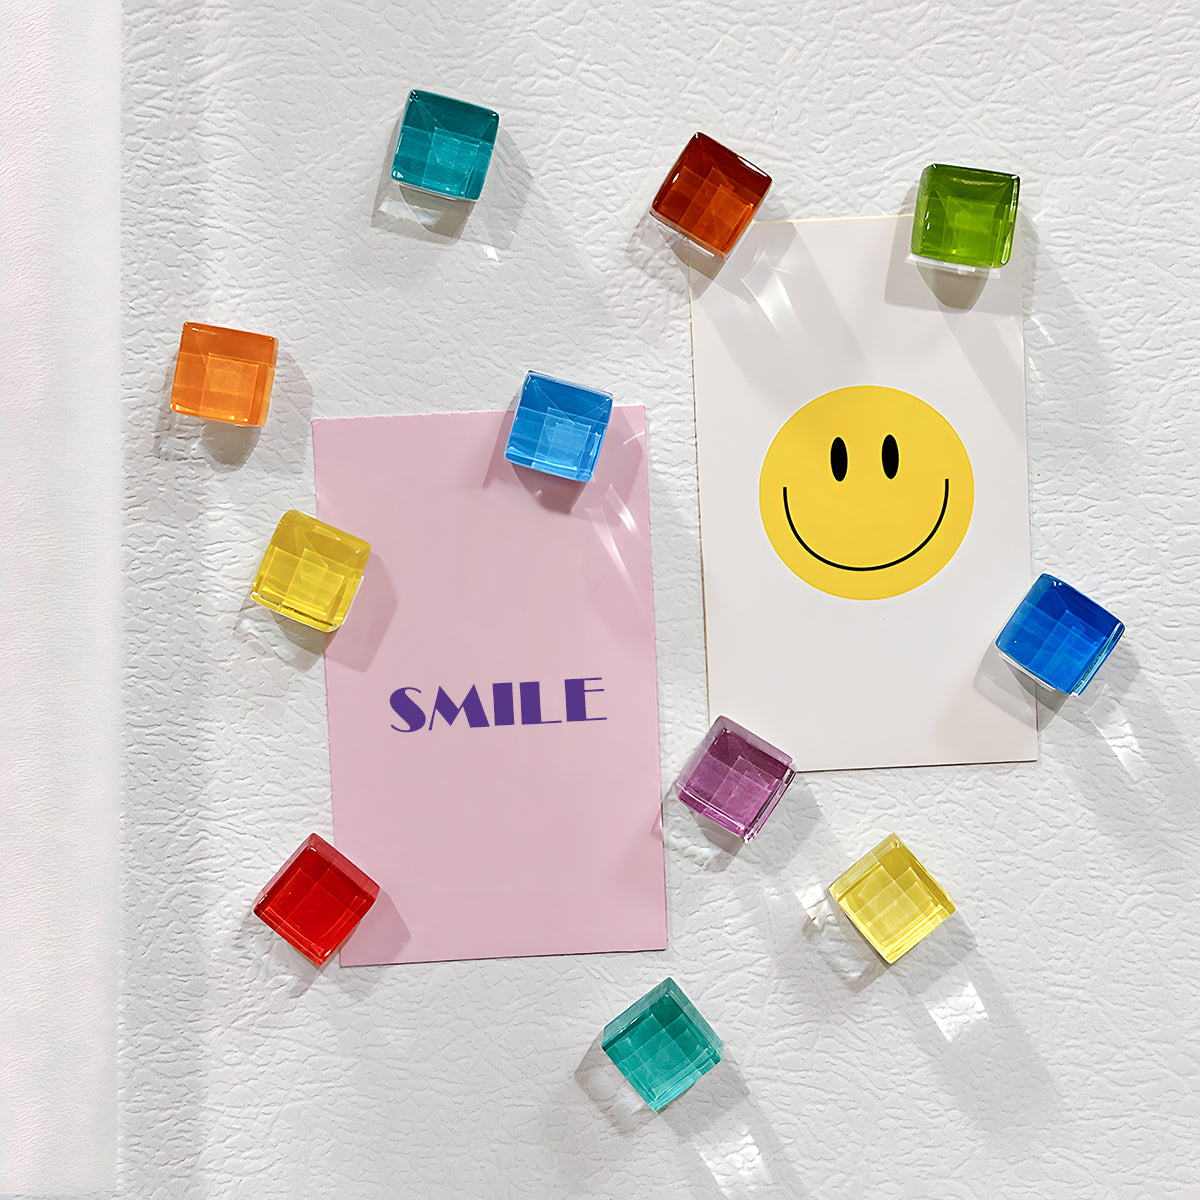 Wrapables Colorful Glass Cube Magnets, Refrigerator Magnets for Office Whiteboards, Cabinets, Lockers (Set of 24)